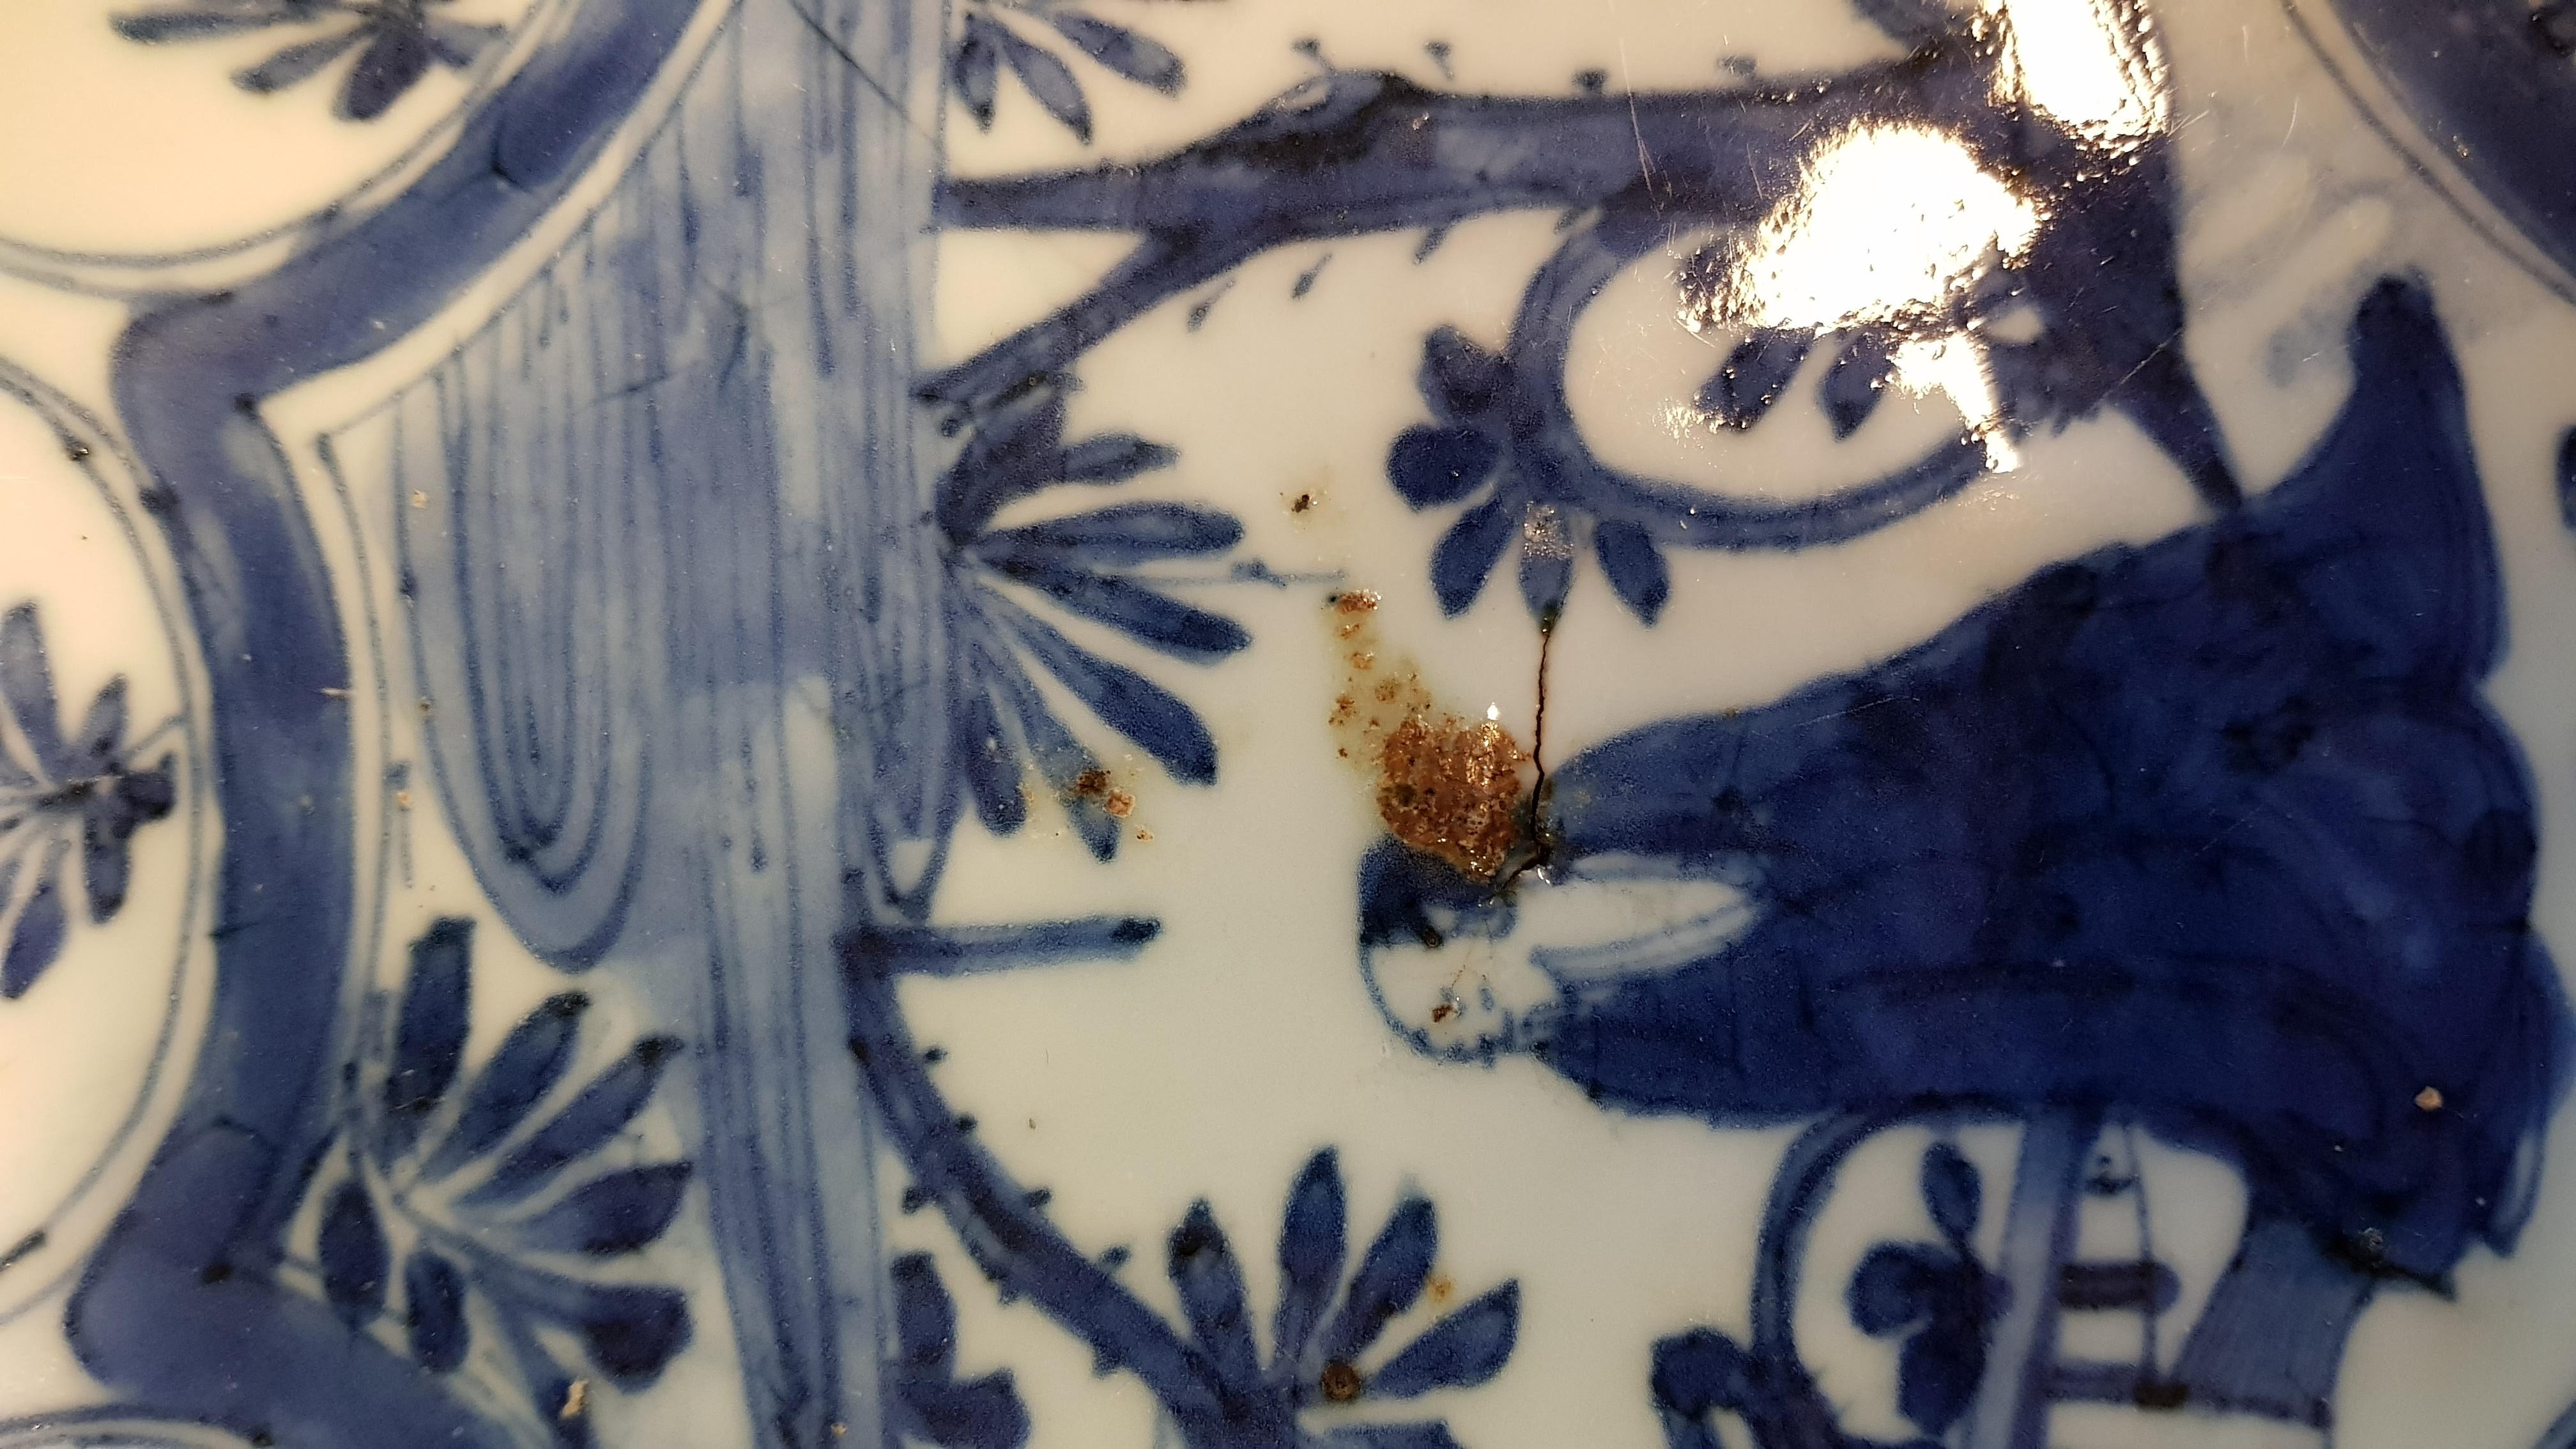 Description
Nice and beautifully decorated dish. Unusual decoration of a litratus in a garden scene under a tree. Superb quality of painting and potting. Ca 1595-1645. Truly nice cobalt blue color

See: Maura Rinaldi: 